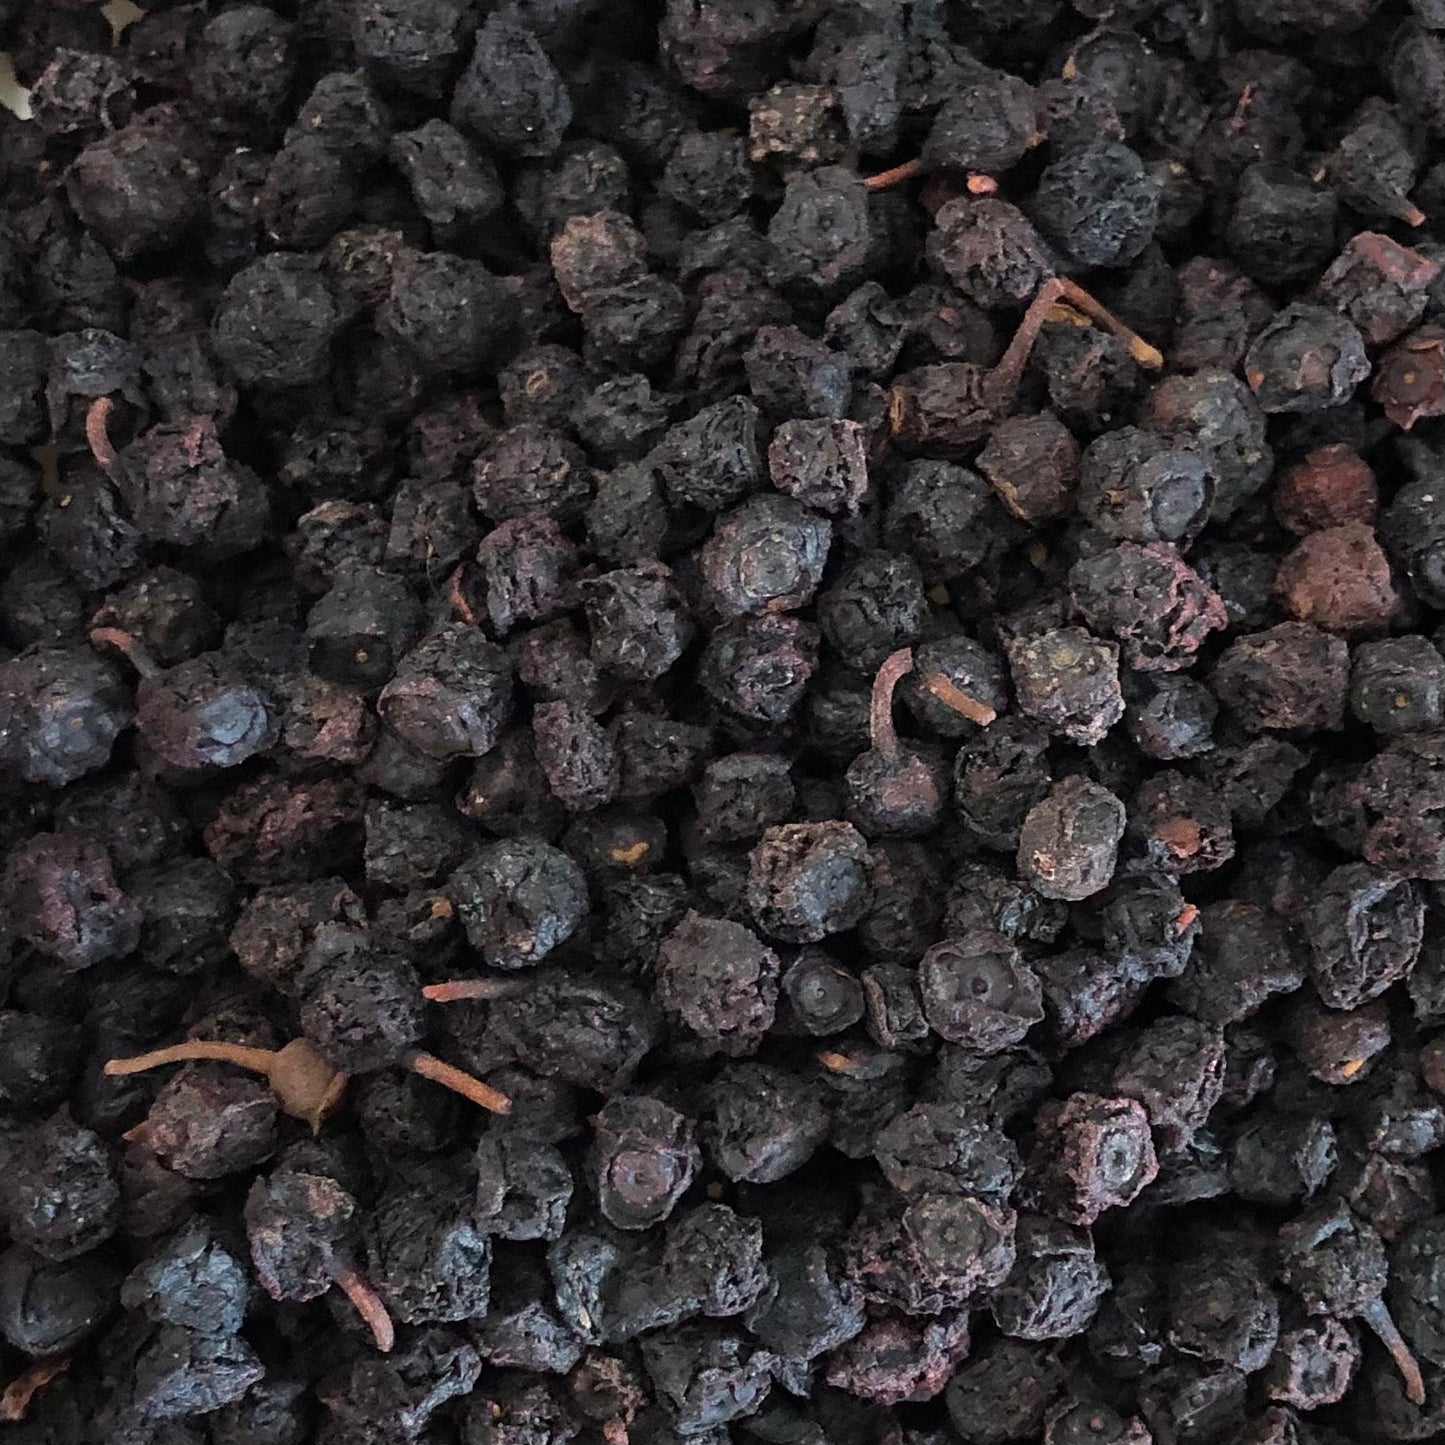 Bilberry Whole Organic by the oz.